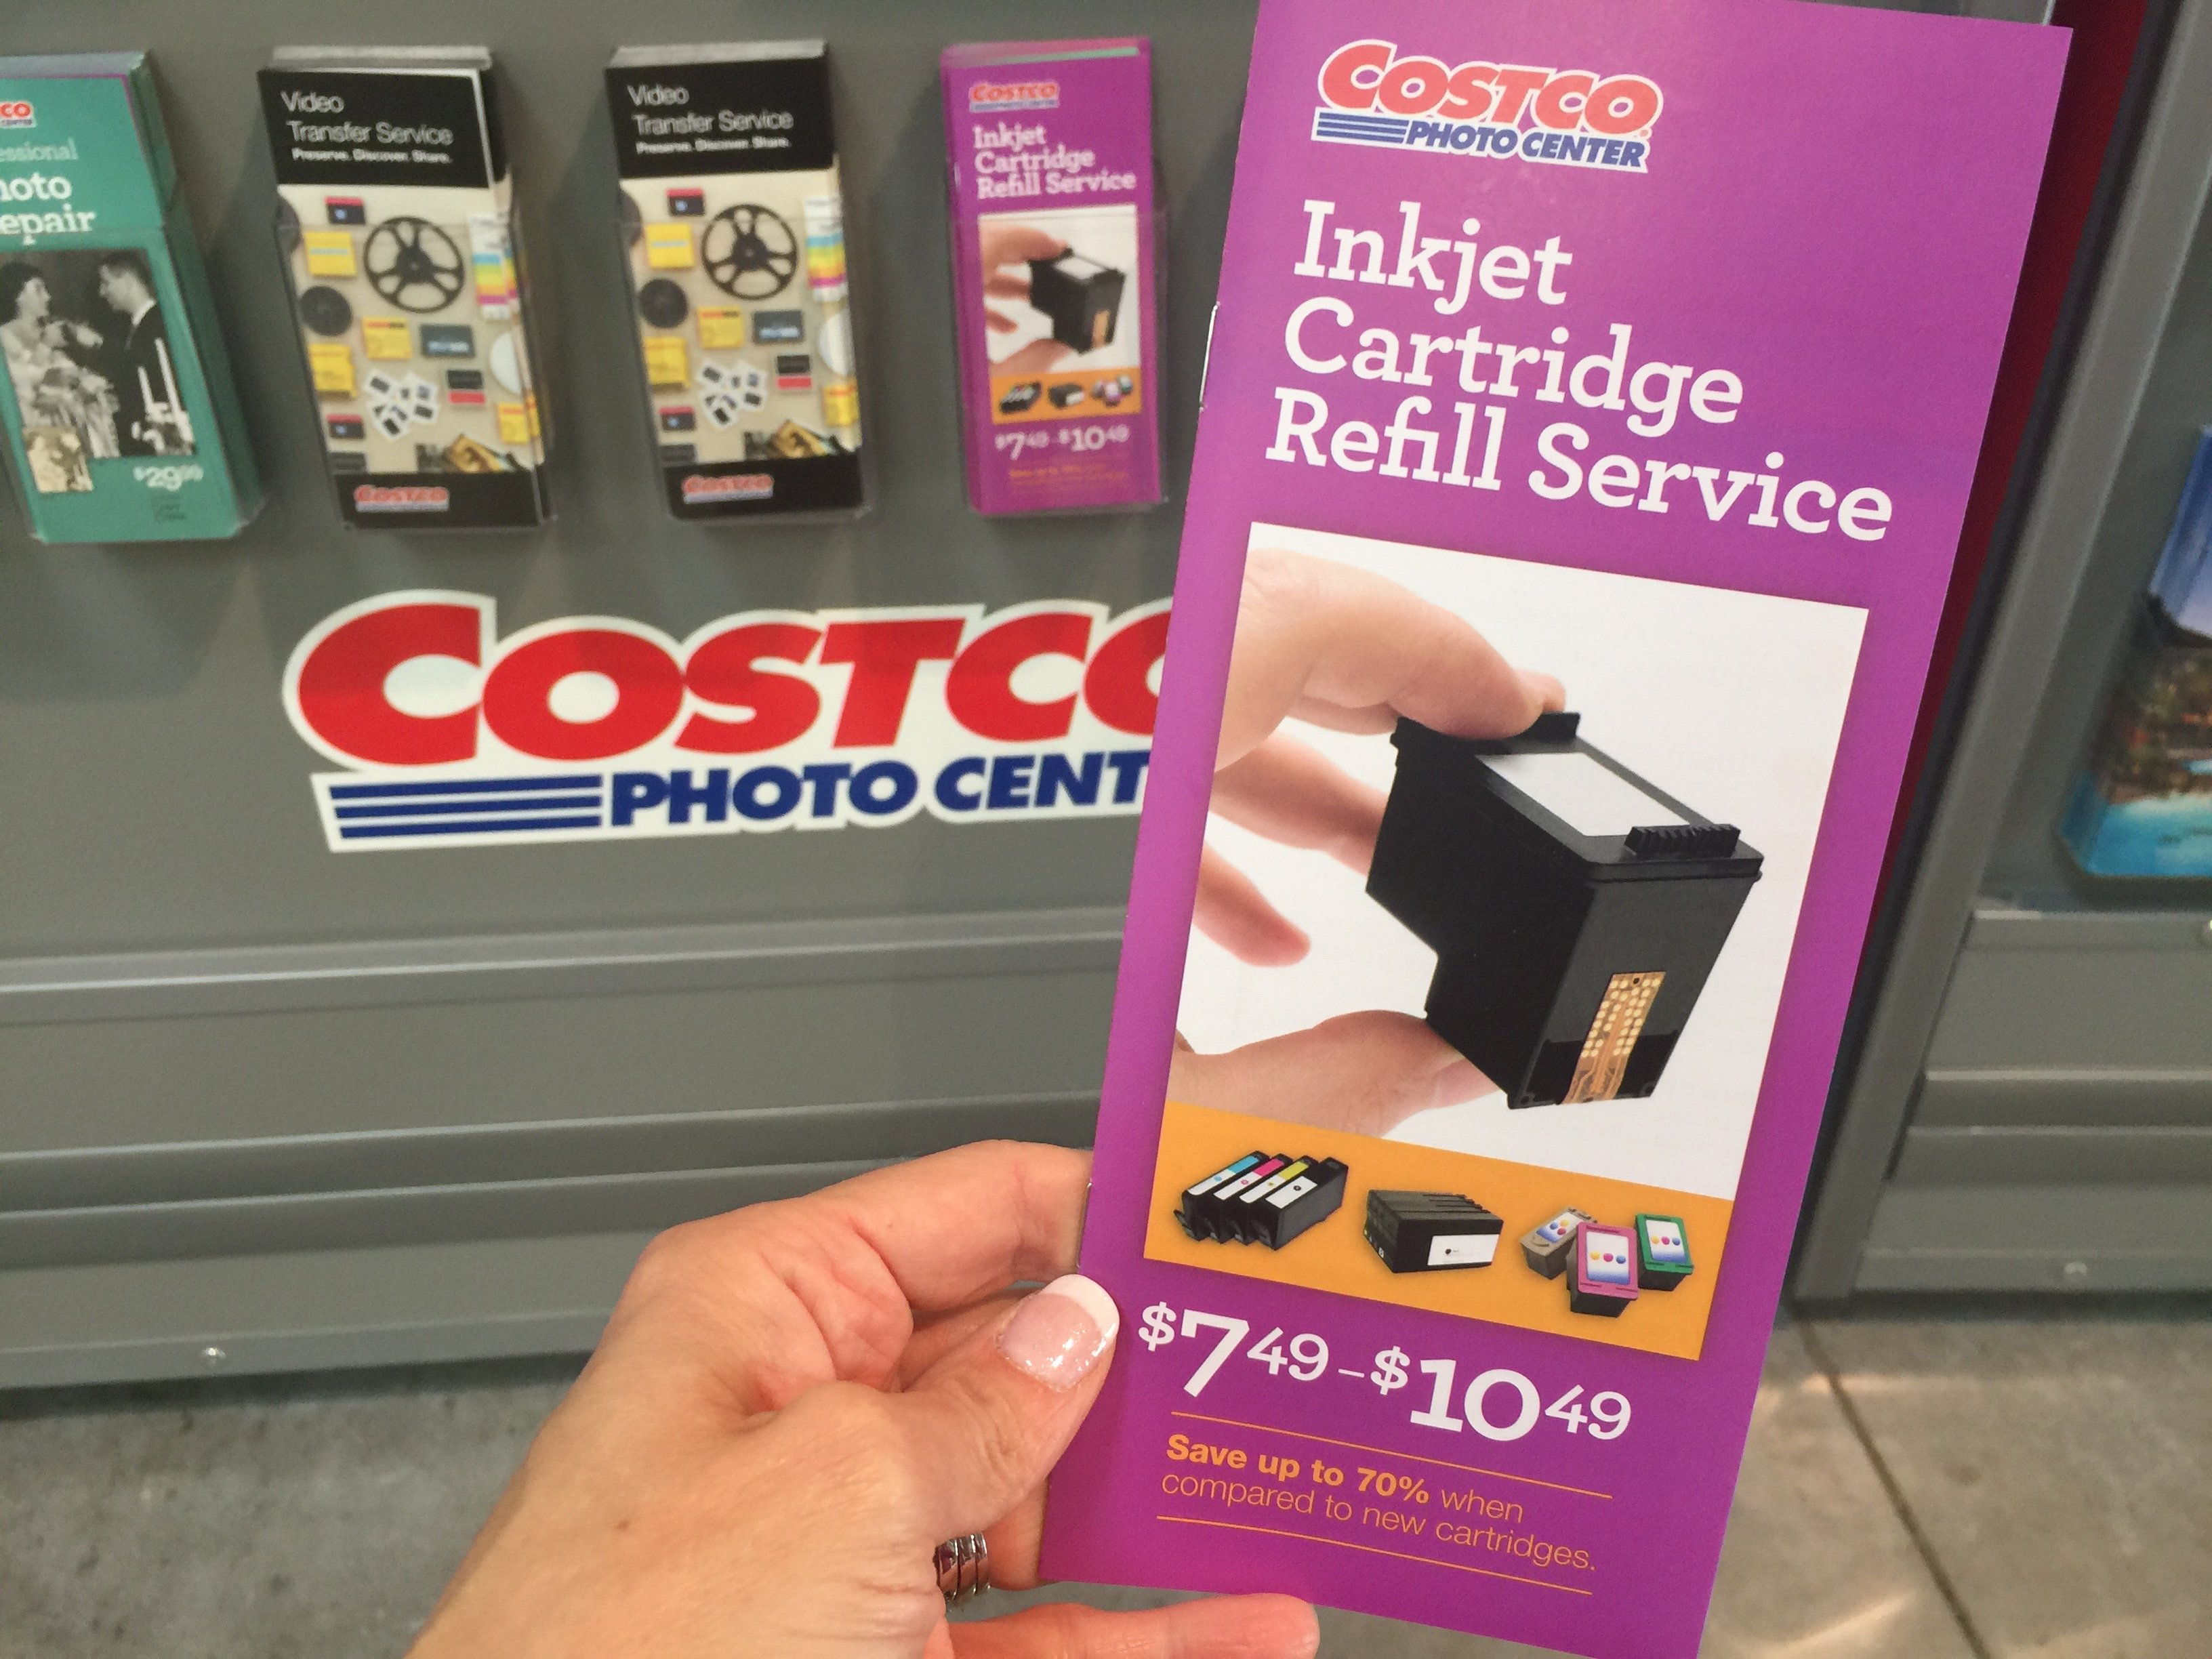 10 ways to save big on printer ink and toner – Costco inkjet cartridge refill service flyer